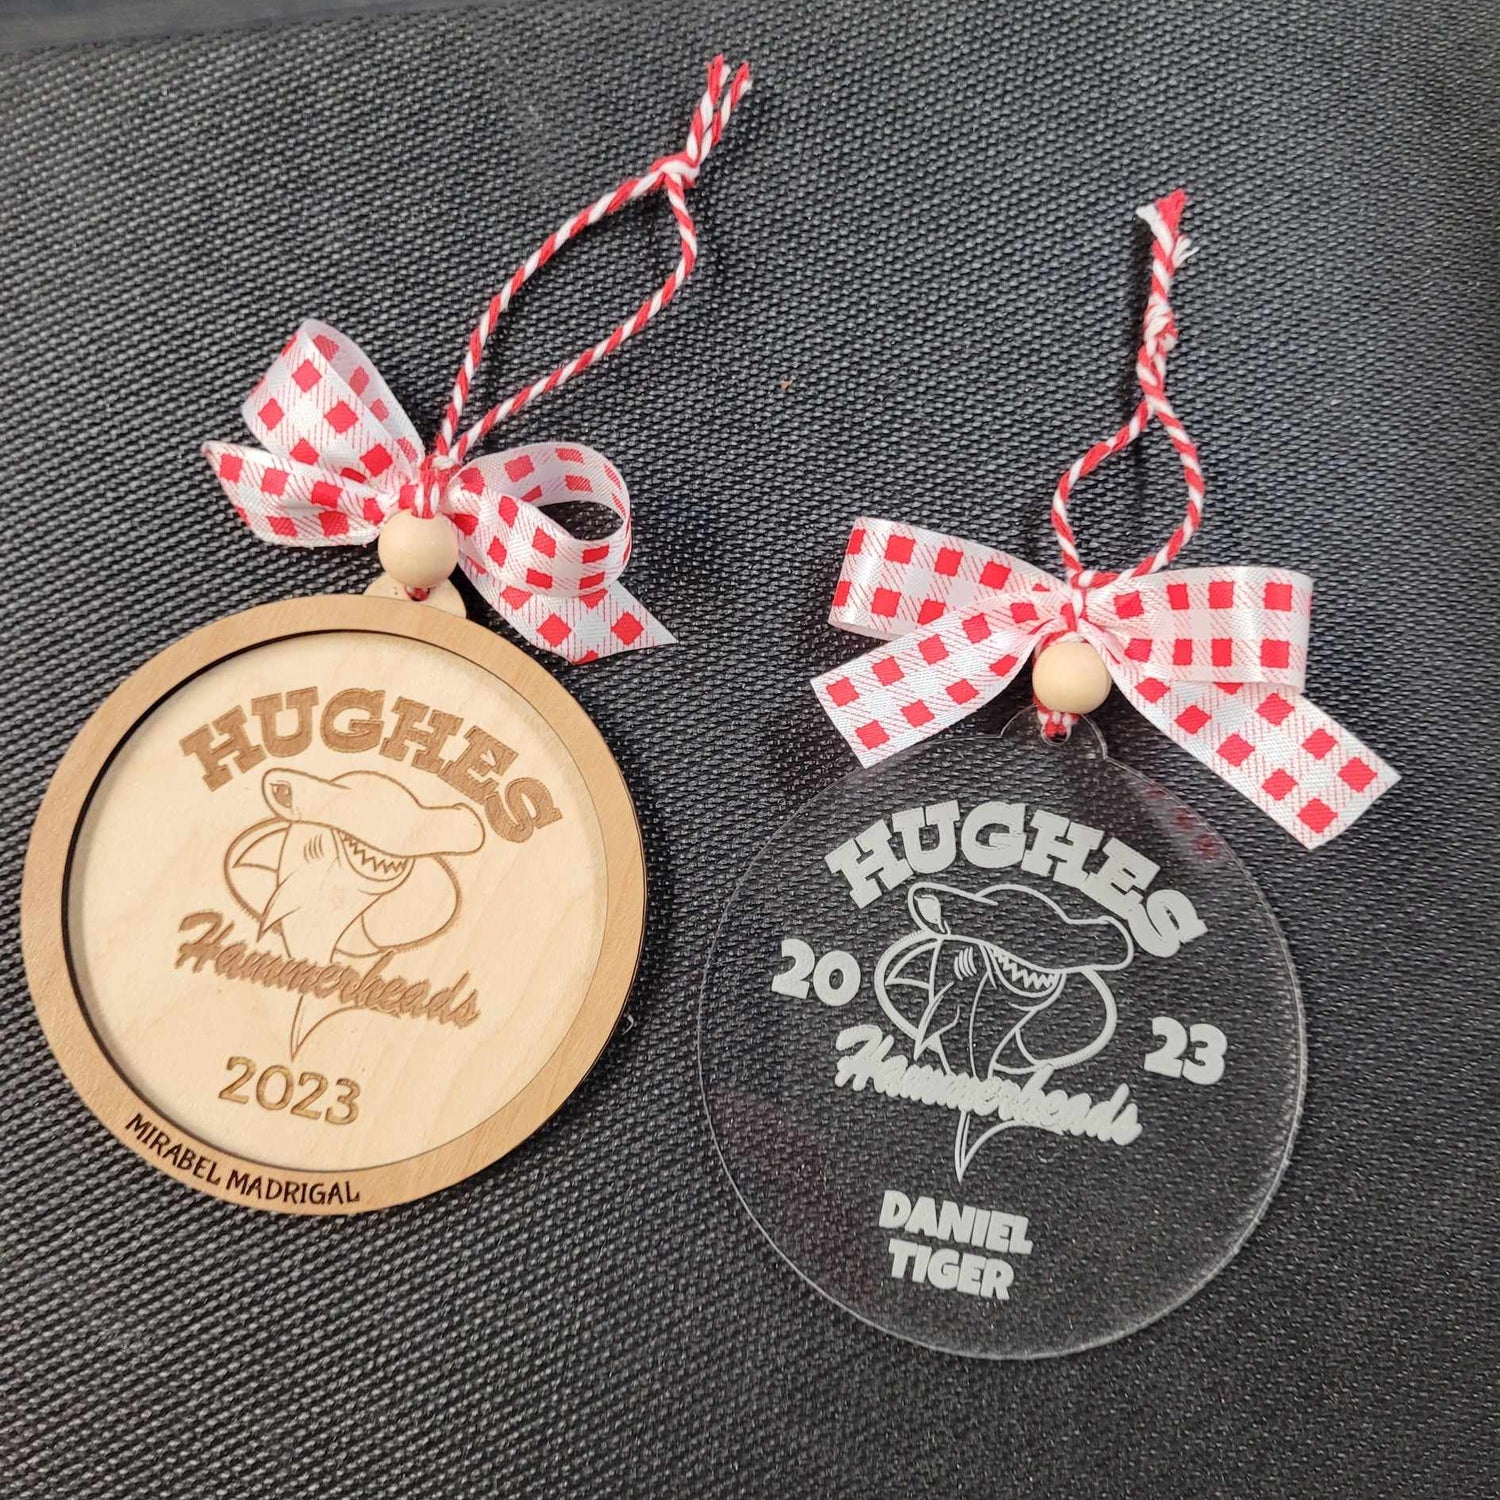 Hughes Hammerheads logo and 2023 on a custom laser engraved holiday and Christmas ornament. The left ornament is made out of maple wood with a red/white bow and string. The right ornament has the design laser engraved on a clear acrylic, both 3.5" in diameter. 